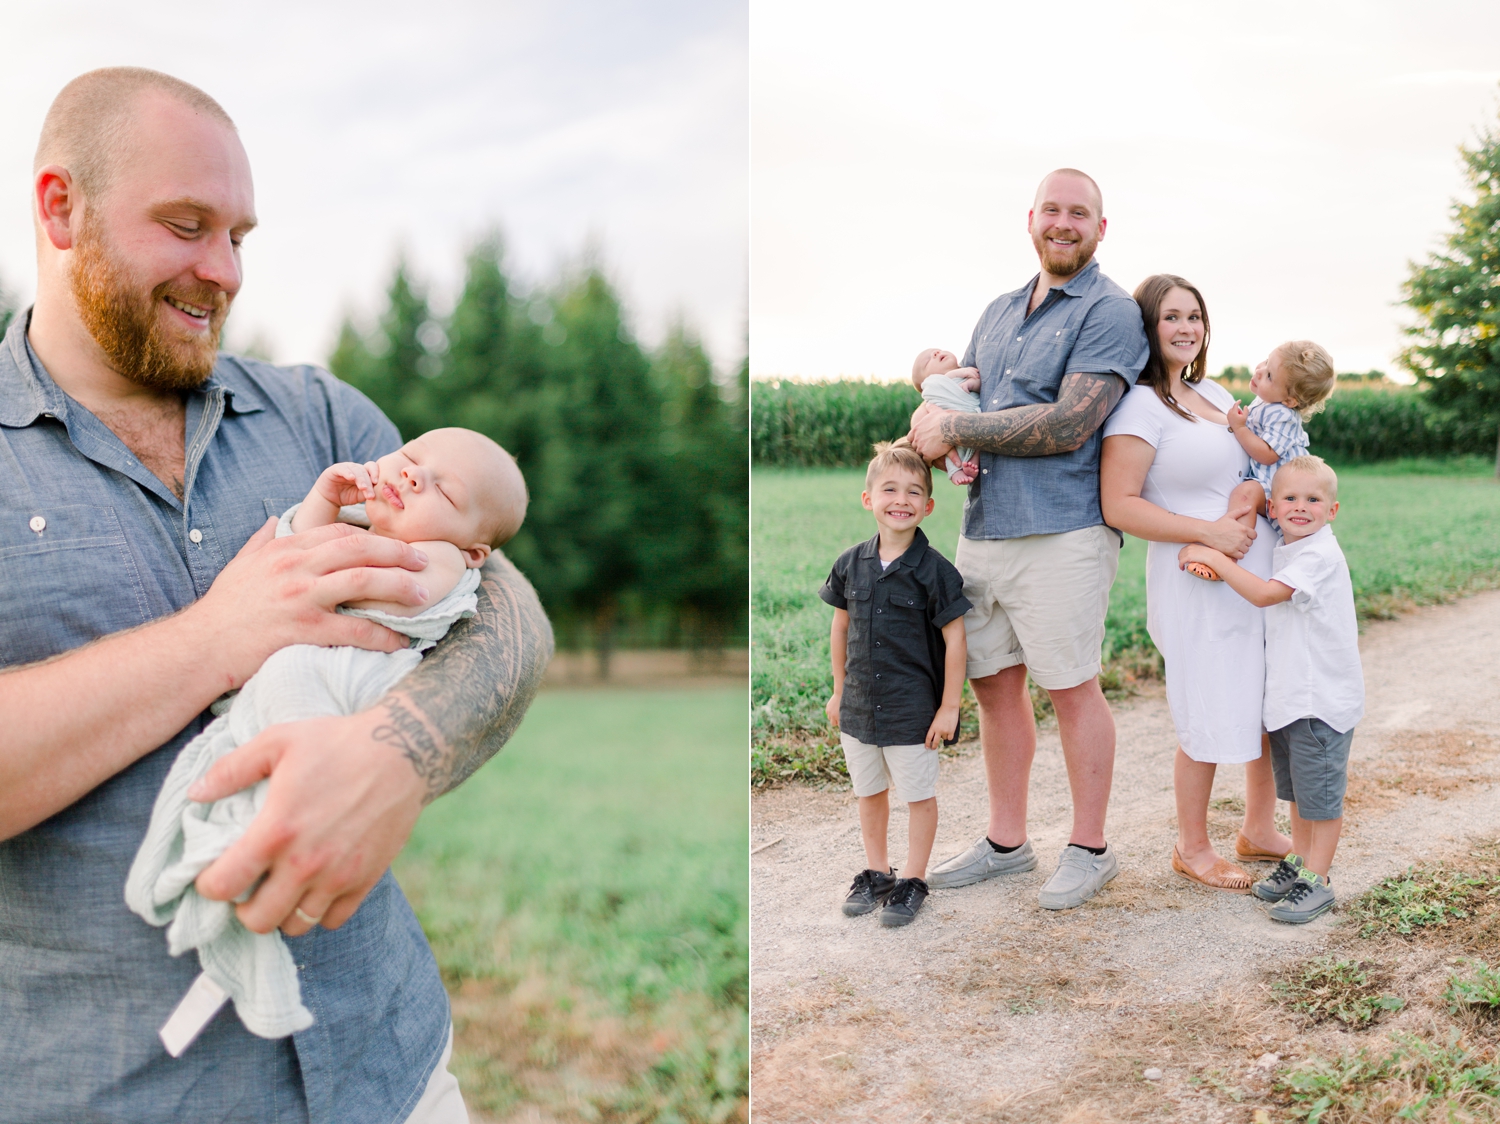 Newborn Session at Pittsfield Park with The Helgesons, Green Bay newborn photographers